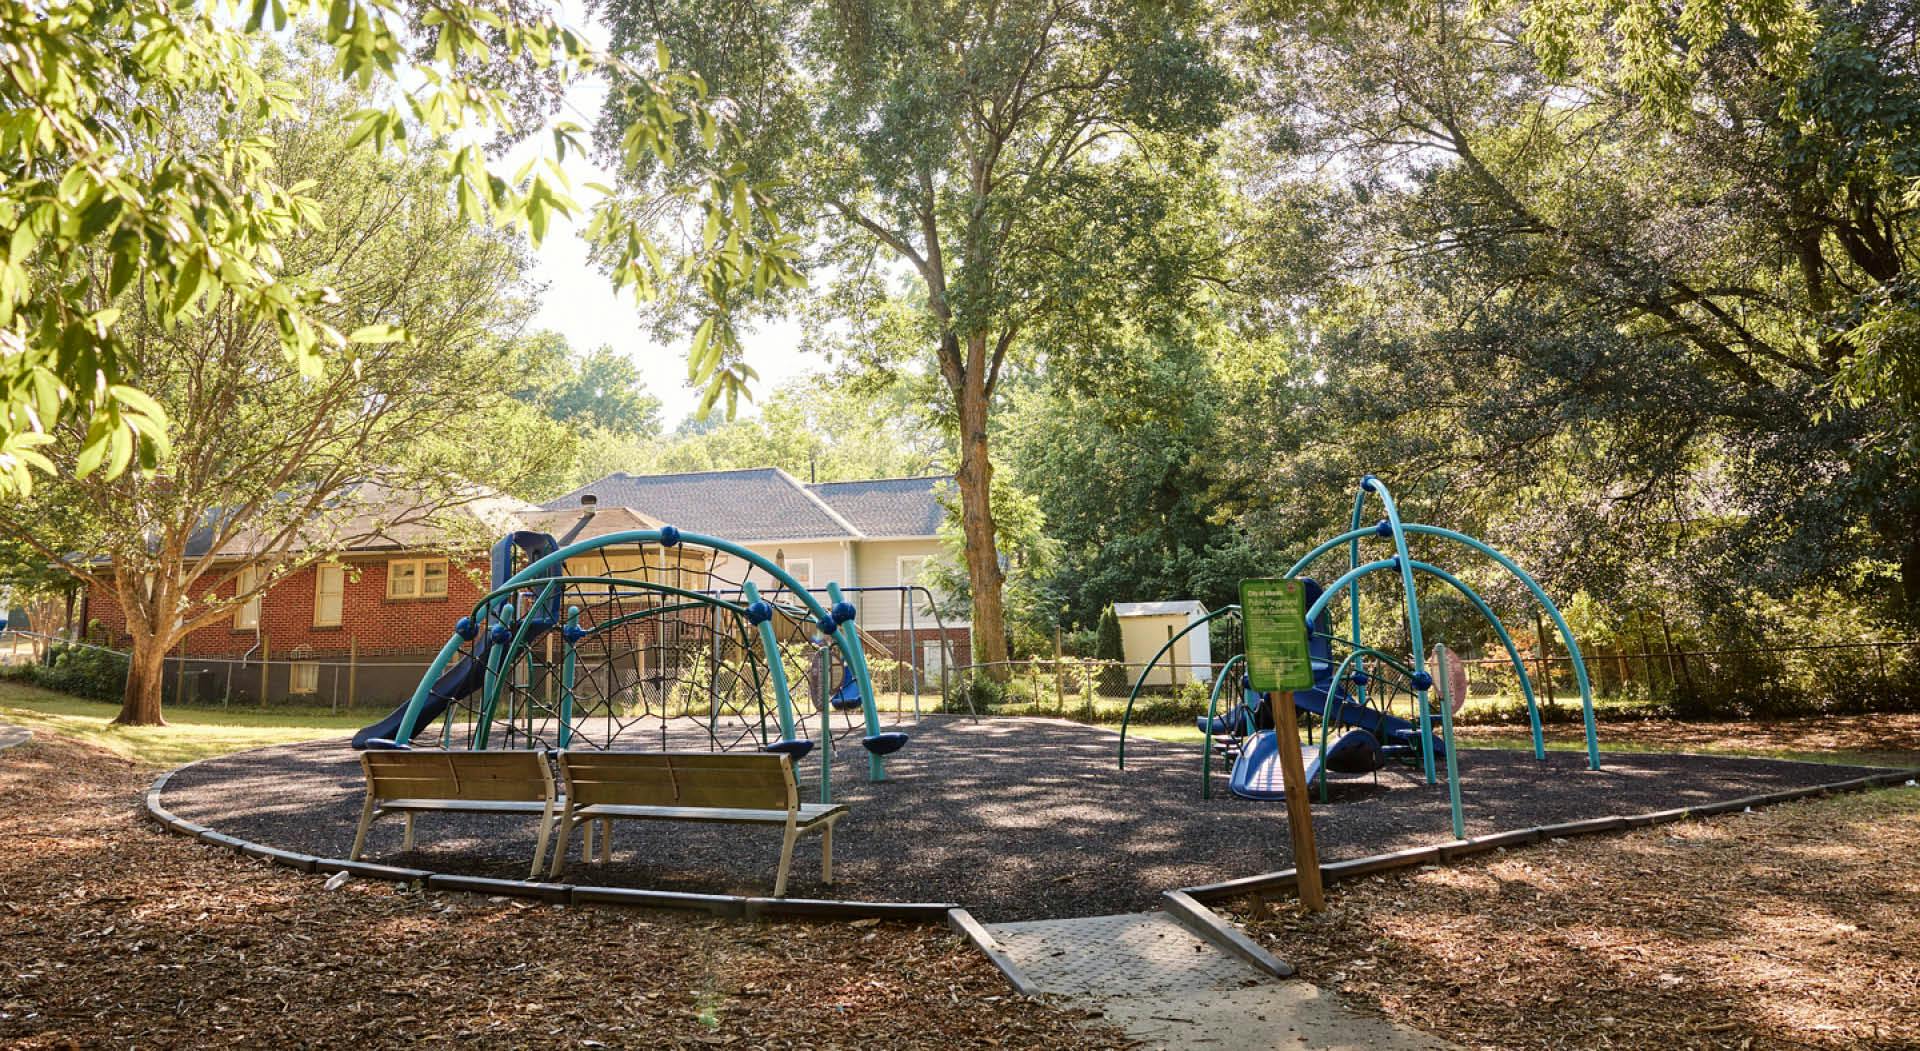 A playground is tucked in Rose Circle Park under a lush tree canopy. (Photo Credit: Erin Sintos)